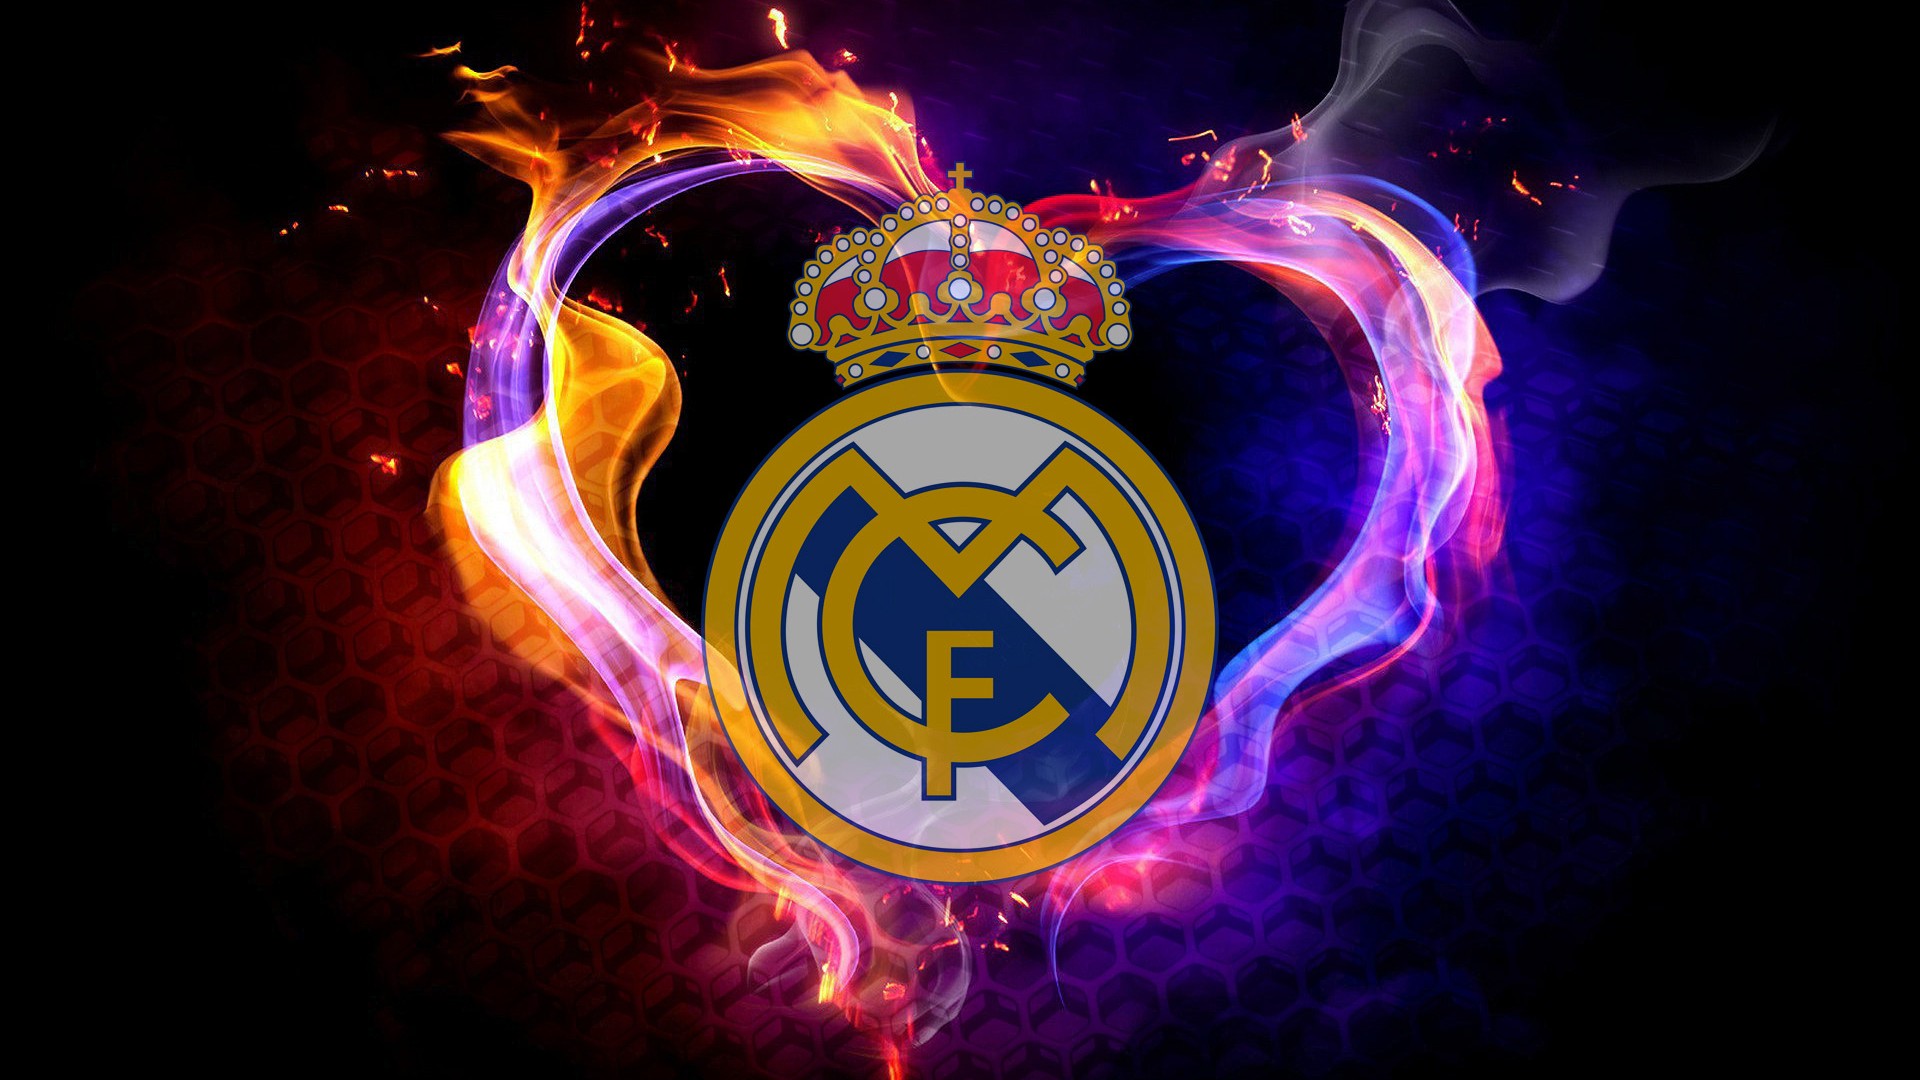 HD Real Madrid CF Wallpapers with resolution 1920x1080 pixel. You can make this wallpaper for your Mac or Windows Desktop Background, iPhone, Android or Tablet and another Smartphone device